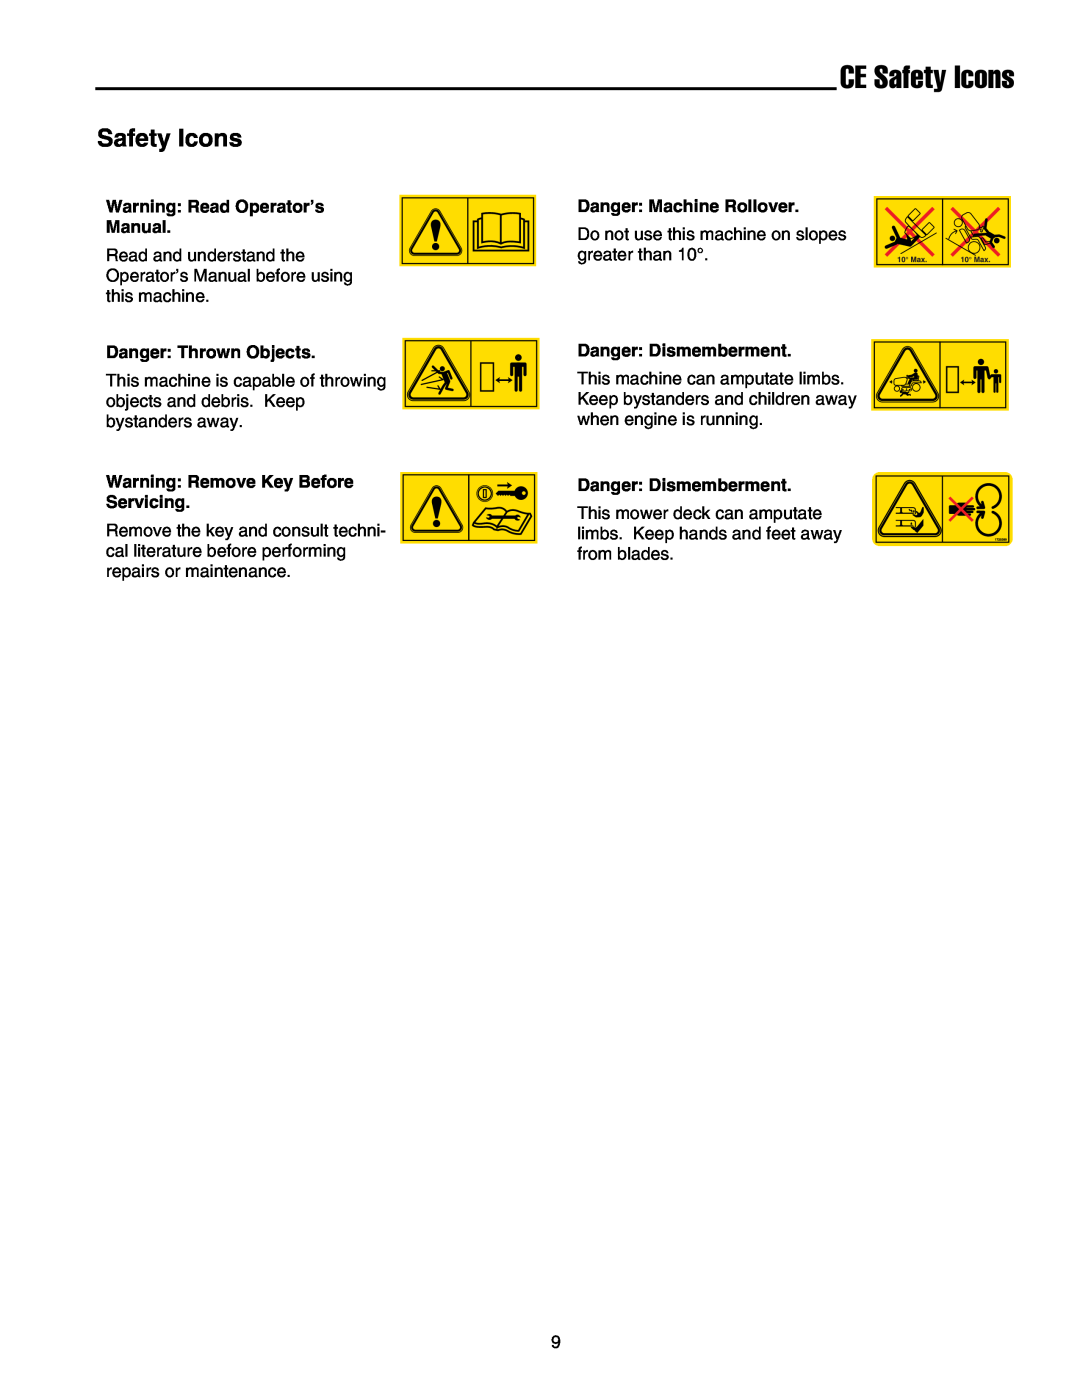 Snapper 1800, 2800, 500, 1700, 2700, 400 manual CE Safety Icons, Warning Read Operator’s Manual, Danger Thrown Objects 